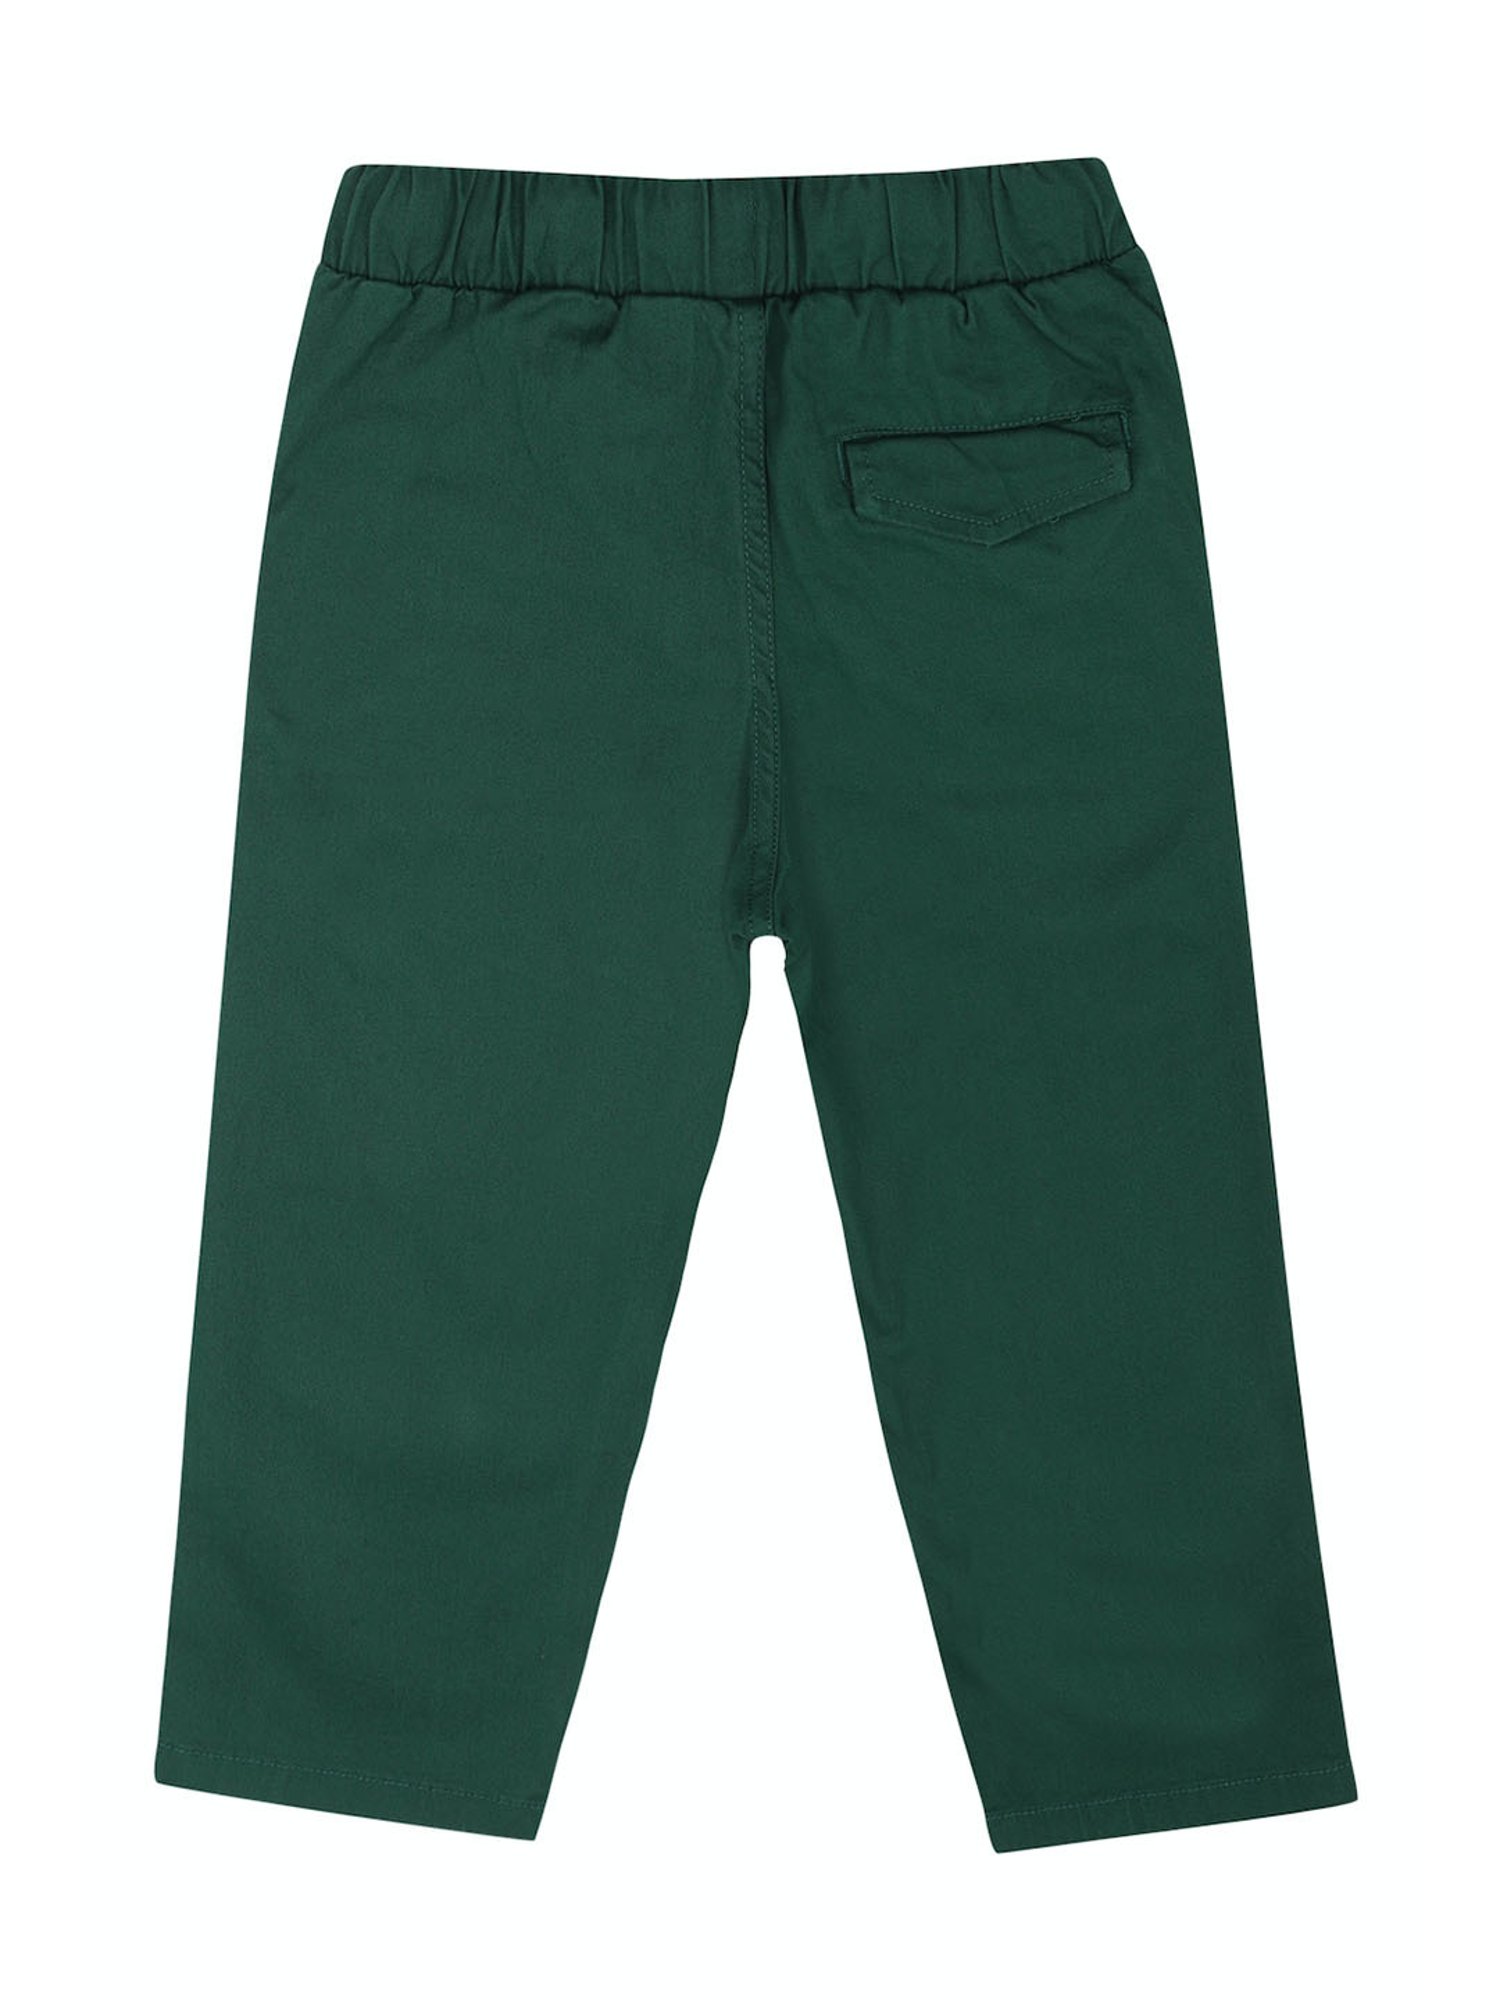 Boys Trousers In Kanpur, Uttar Pradesh At Best Price | Boys Trousers  Manufacturers, Suppliers In Cawnpore